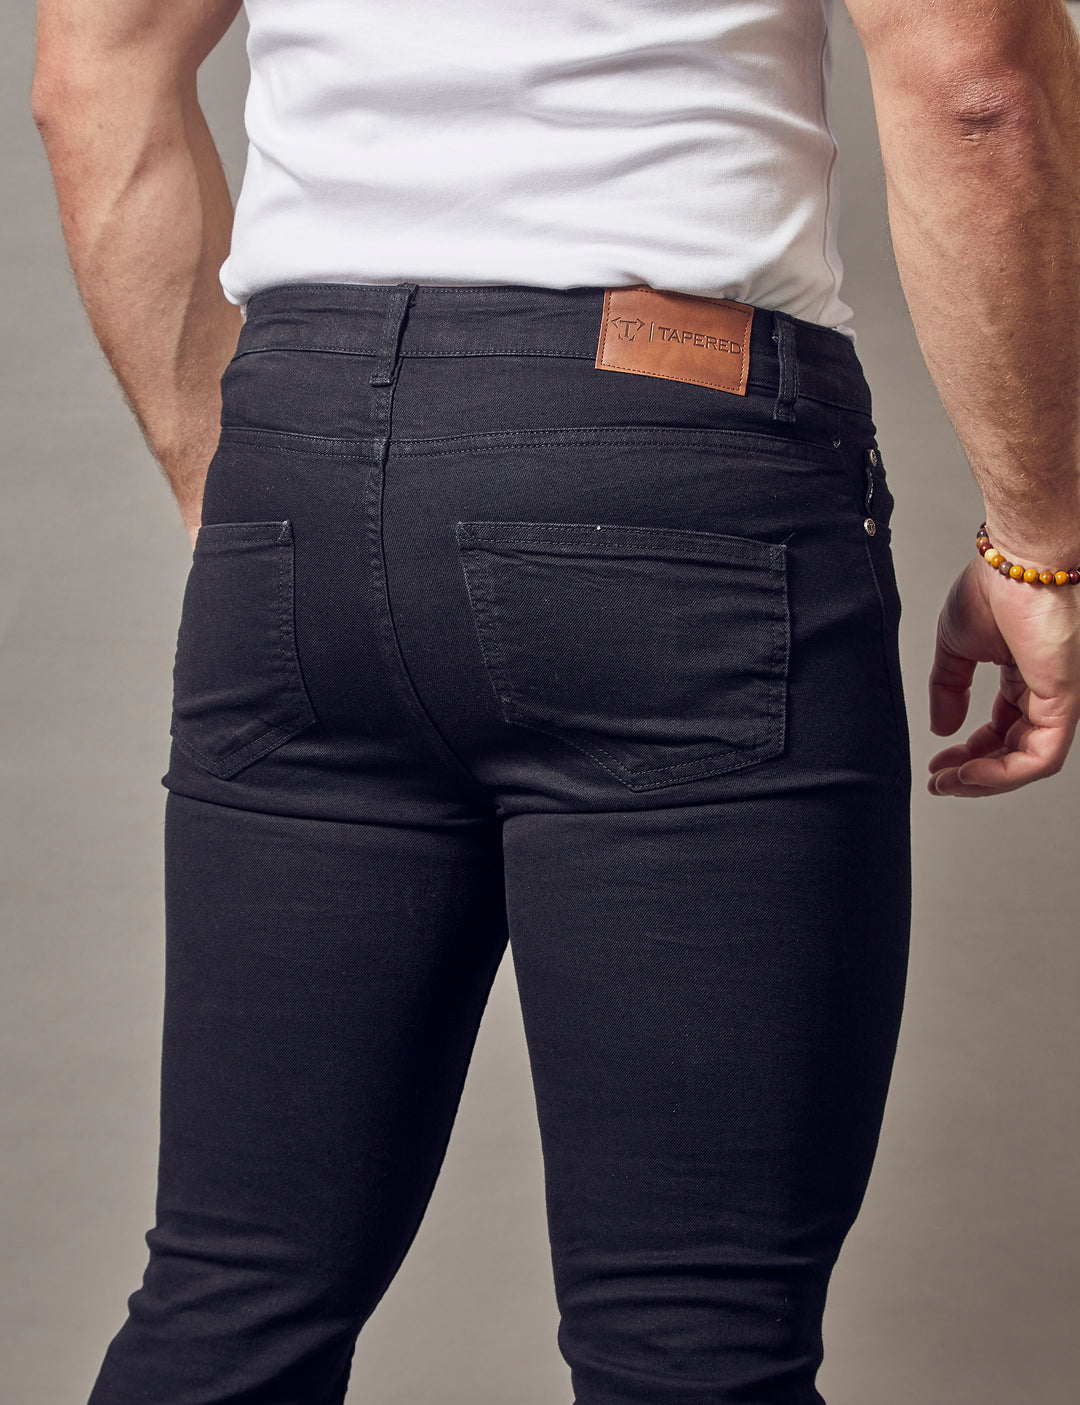 Black Tapered Fit Jeans